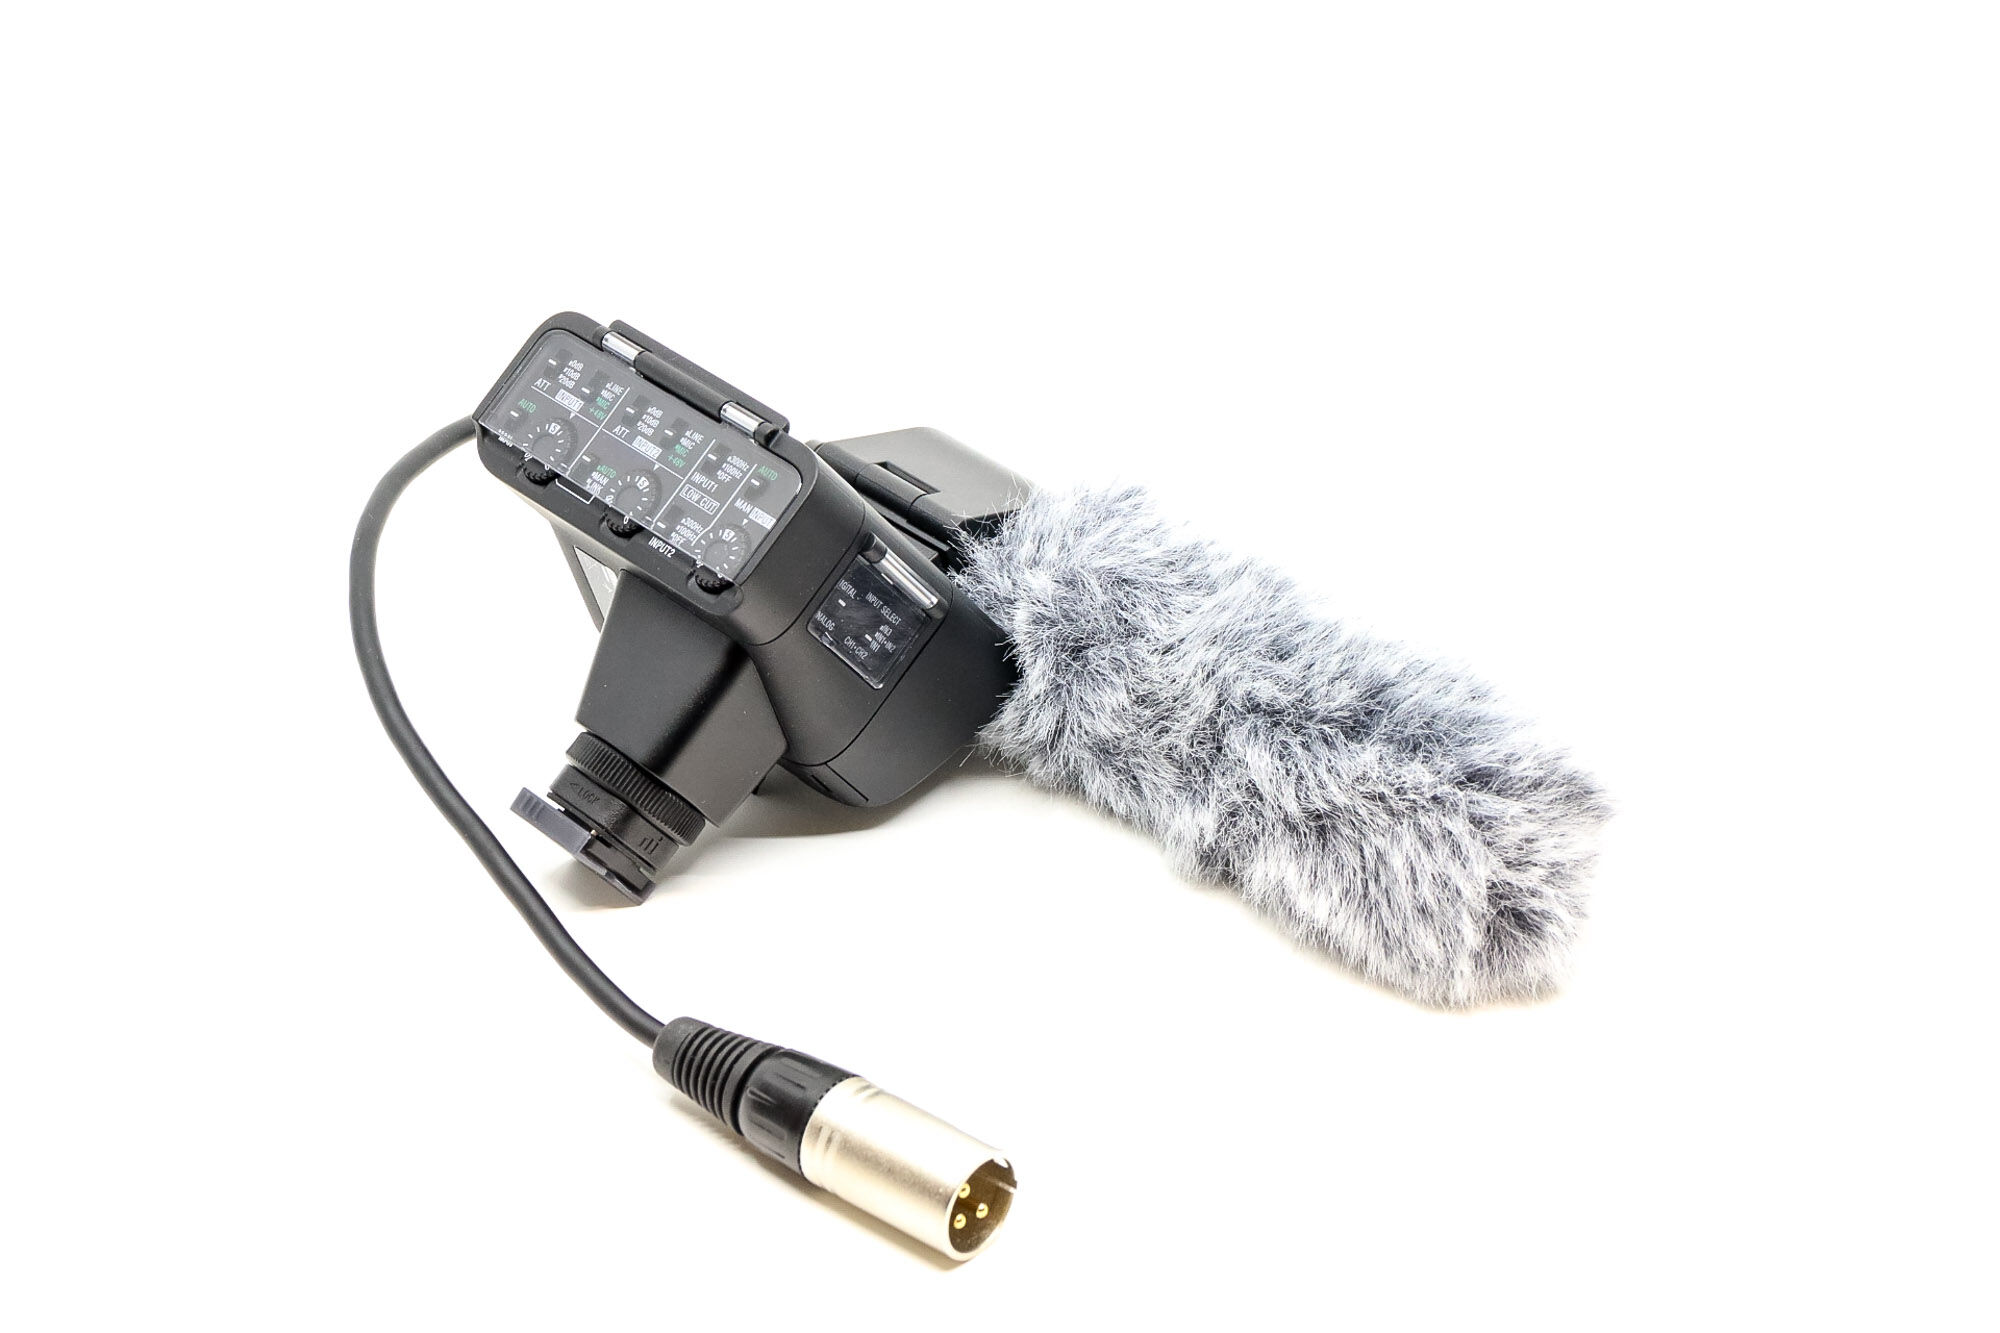 sony xlr-k3m adapter and microphone kit (condition: like new)